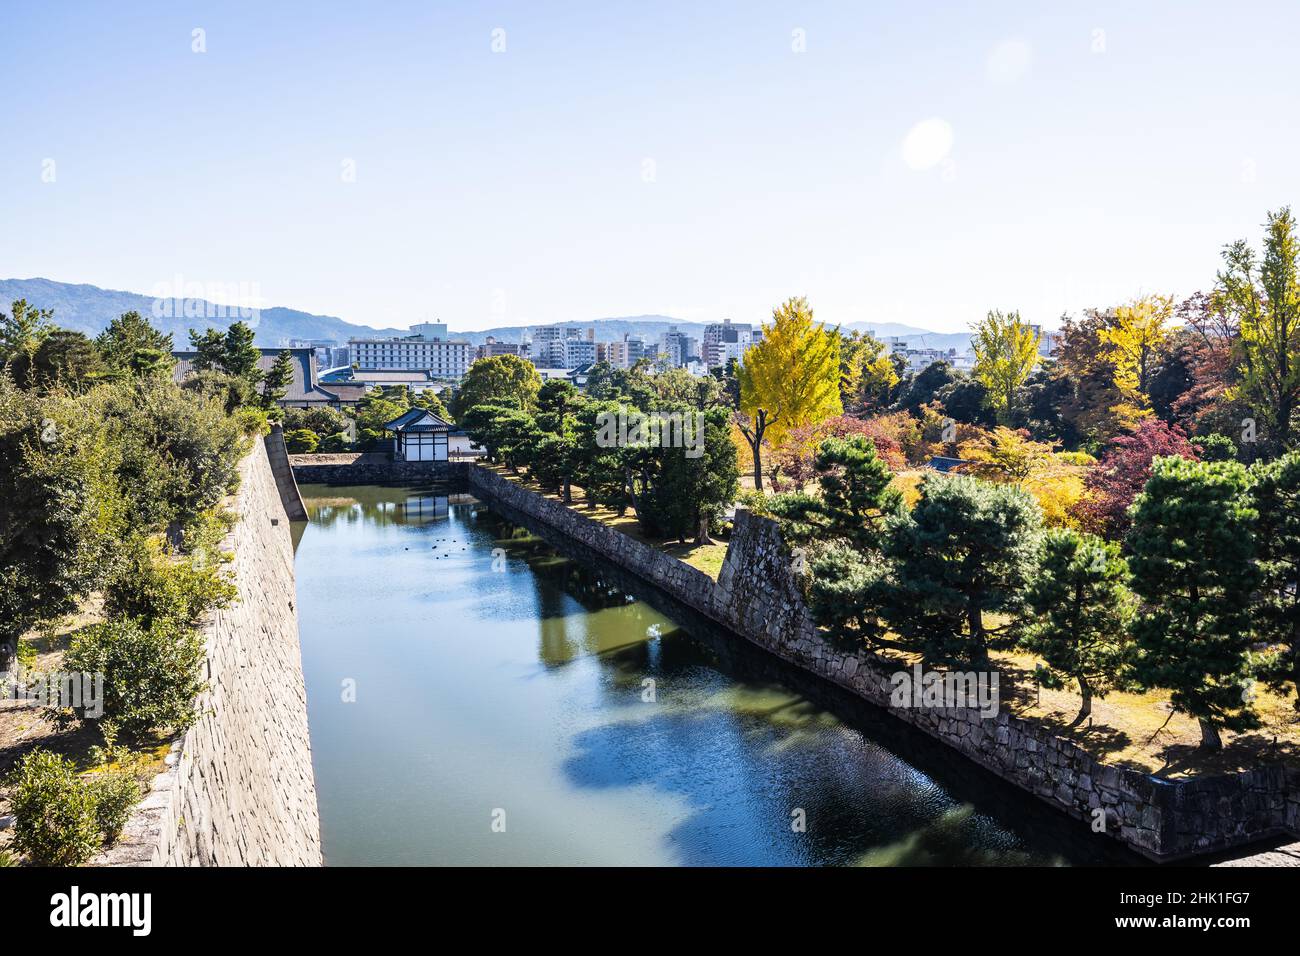 The moat of Nijo Castle with the city of Kyoto in the background and fall colors on the trees in daylight. Stock Photo